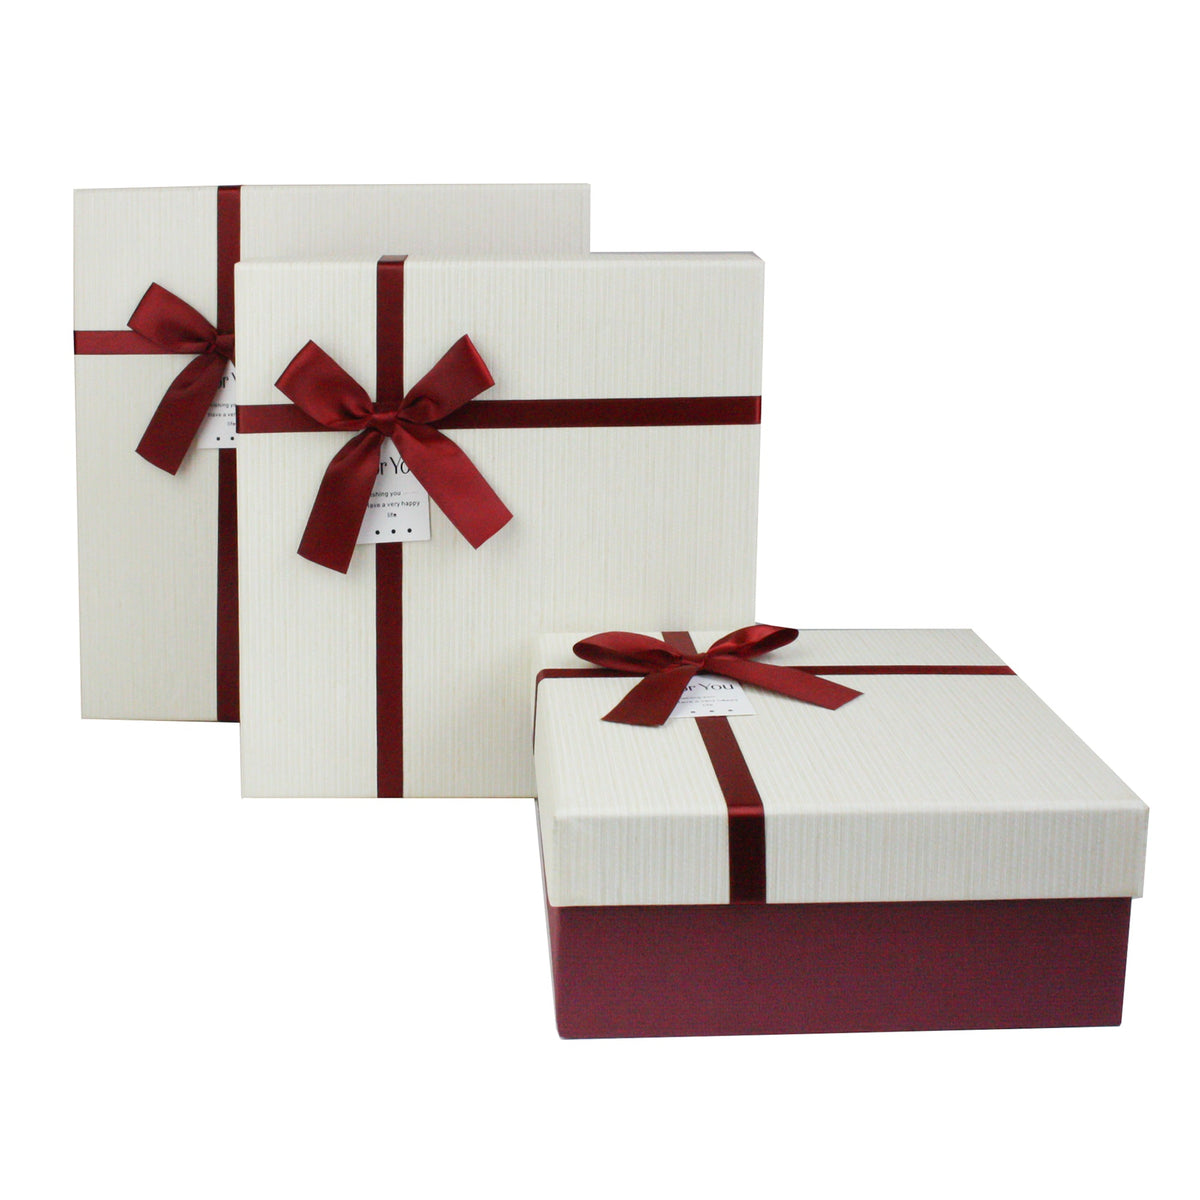 Set of 3 Square Burgundy/Cream Gift Boxes With Red Satin Ribbon